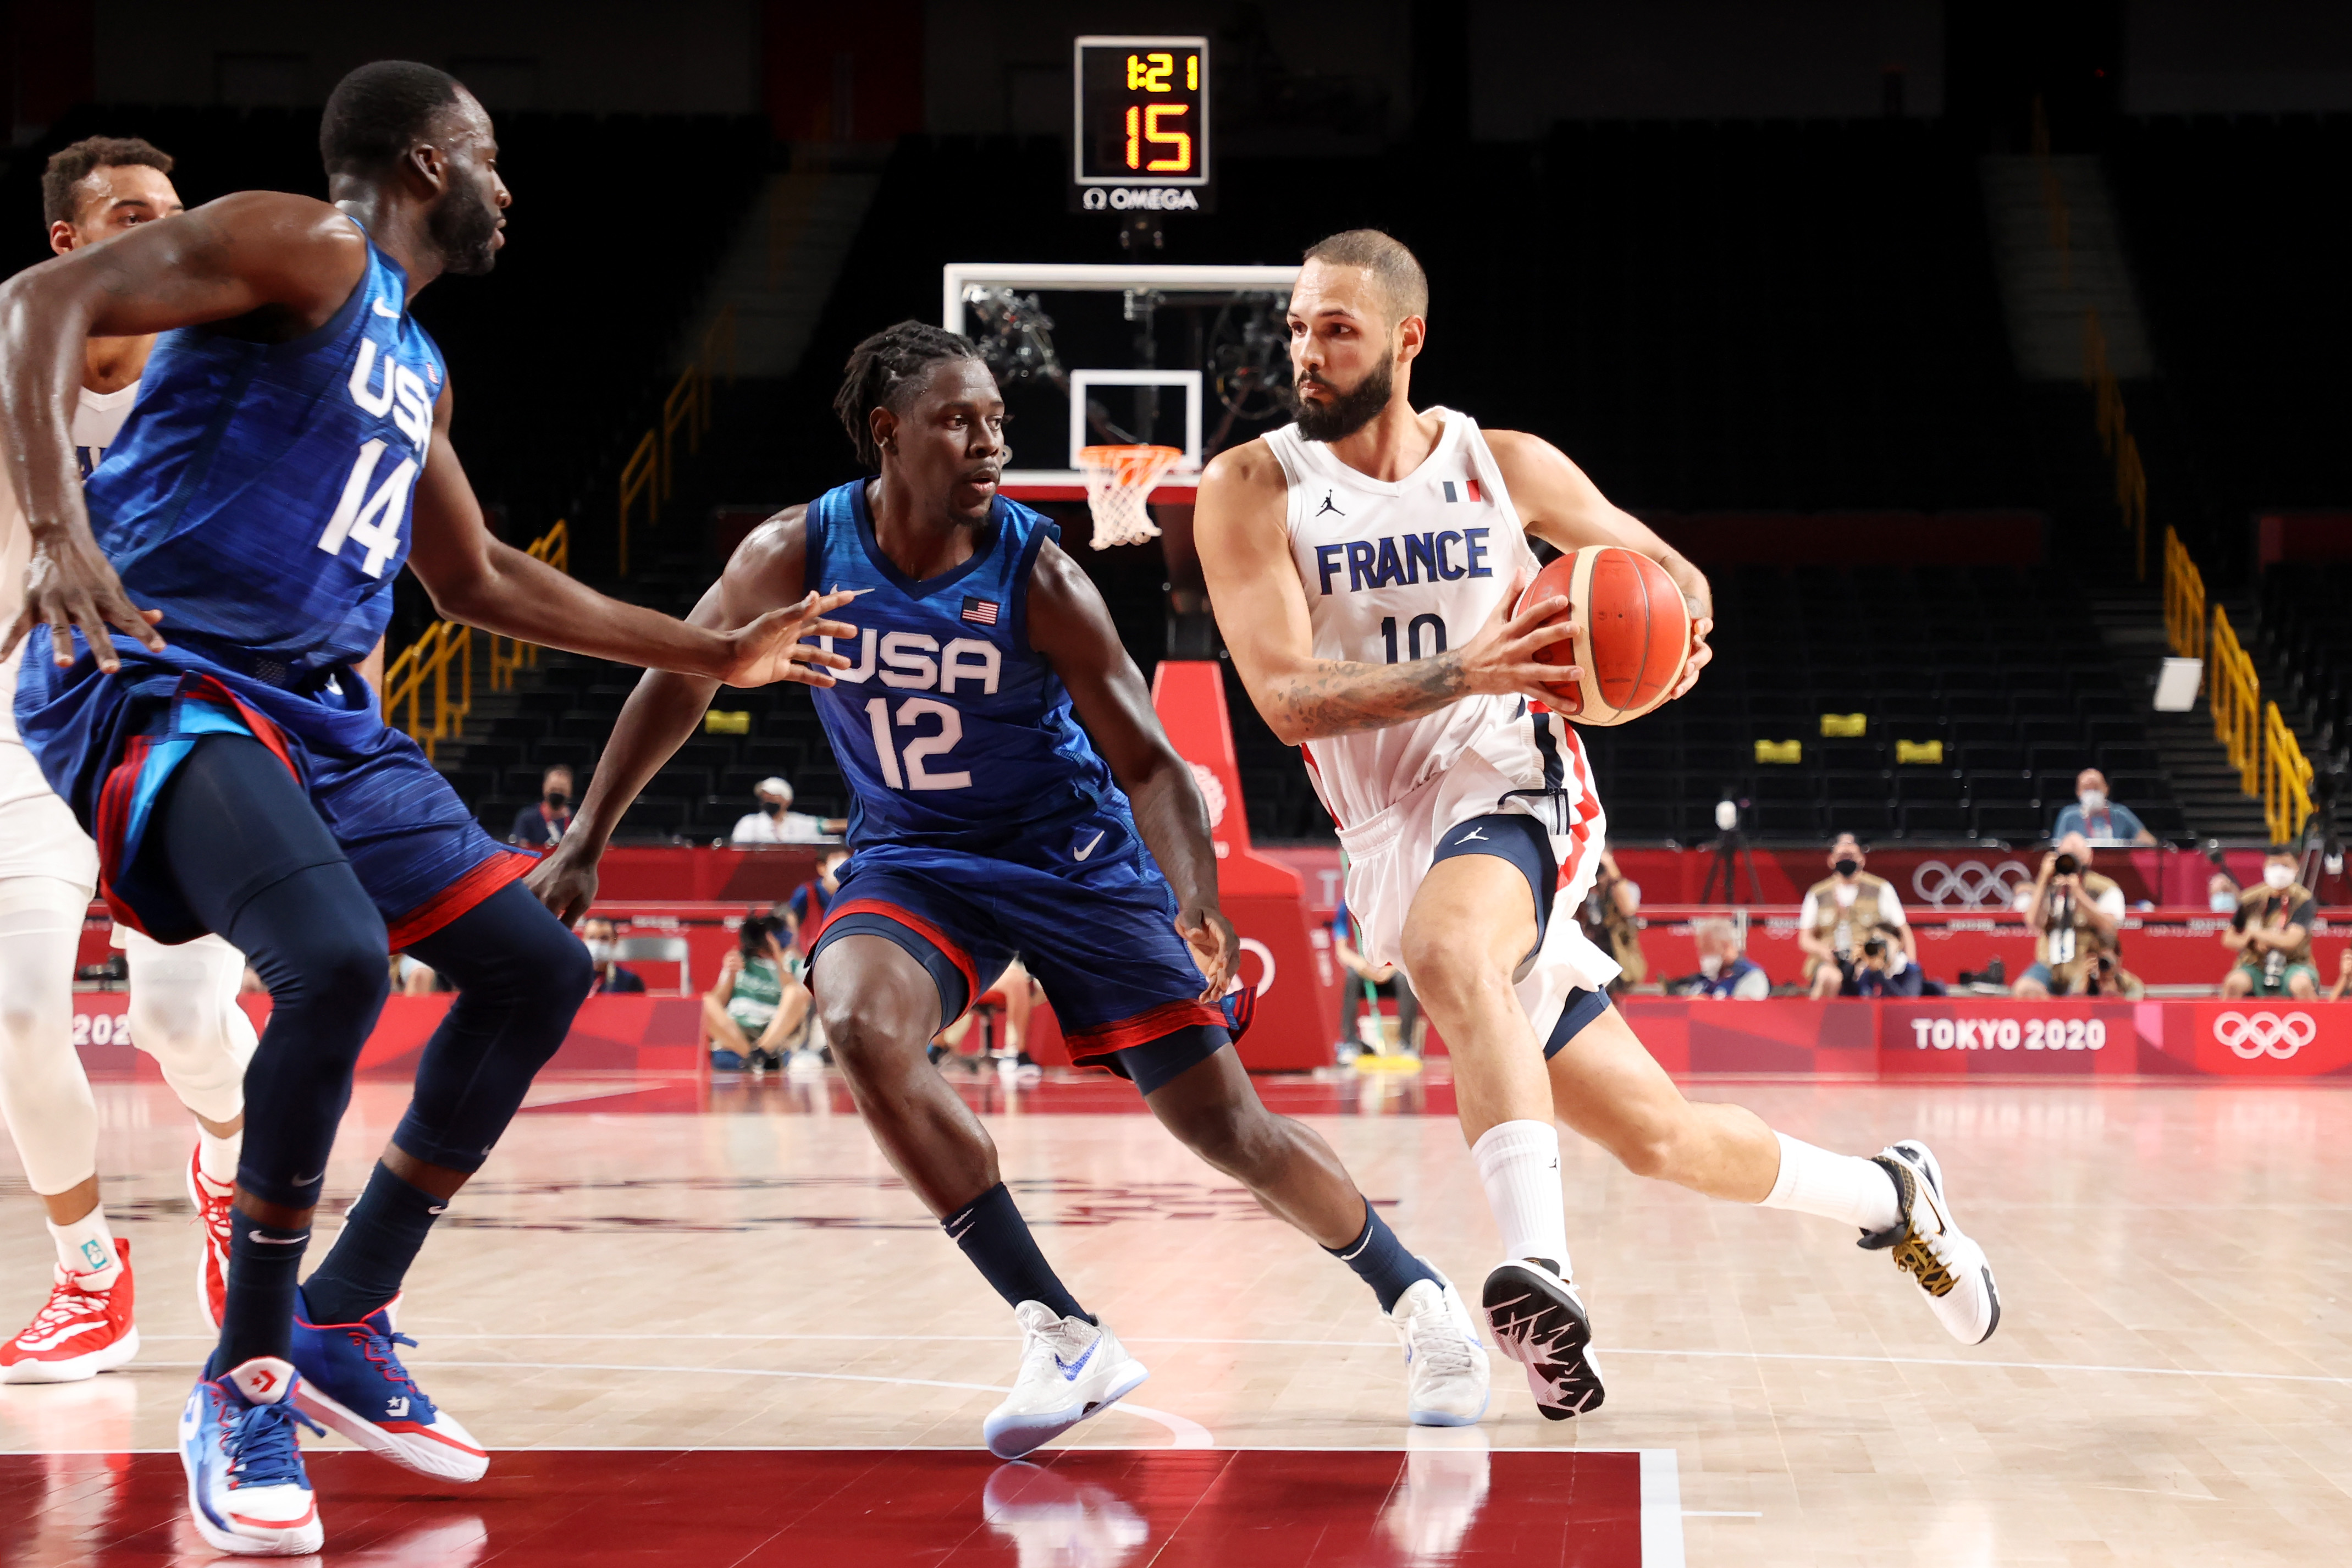 The Celtic short runner Evan Fournier scored 28 points in France's victory against the USA.